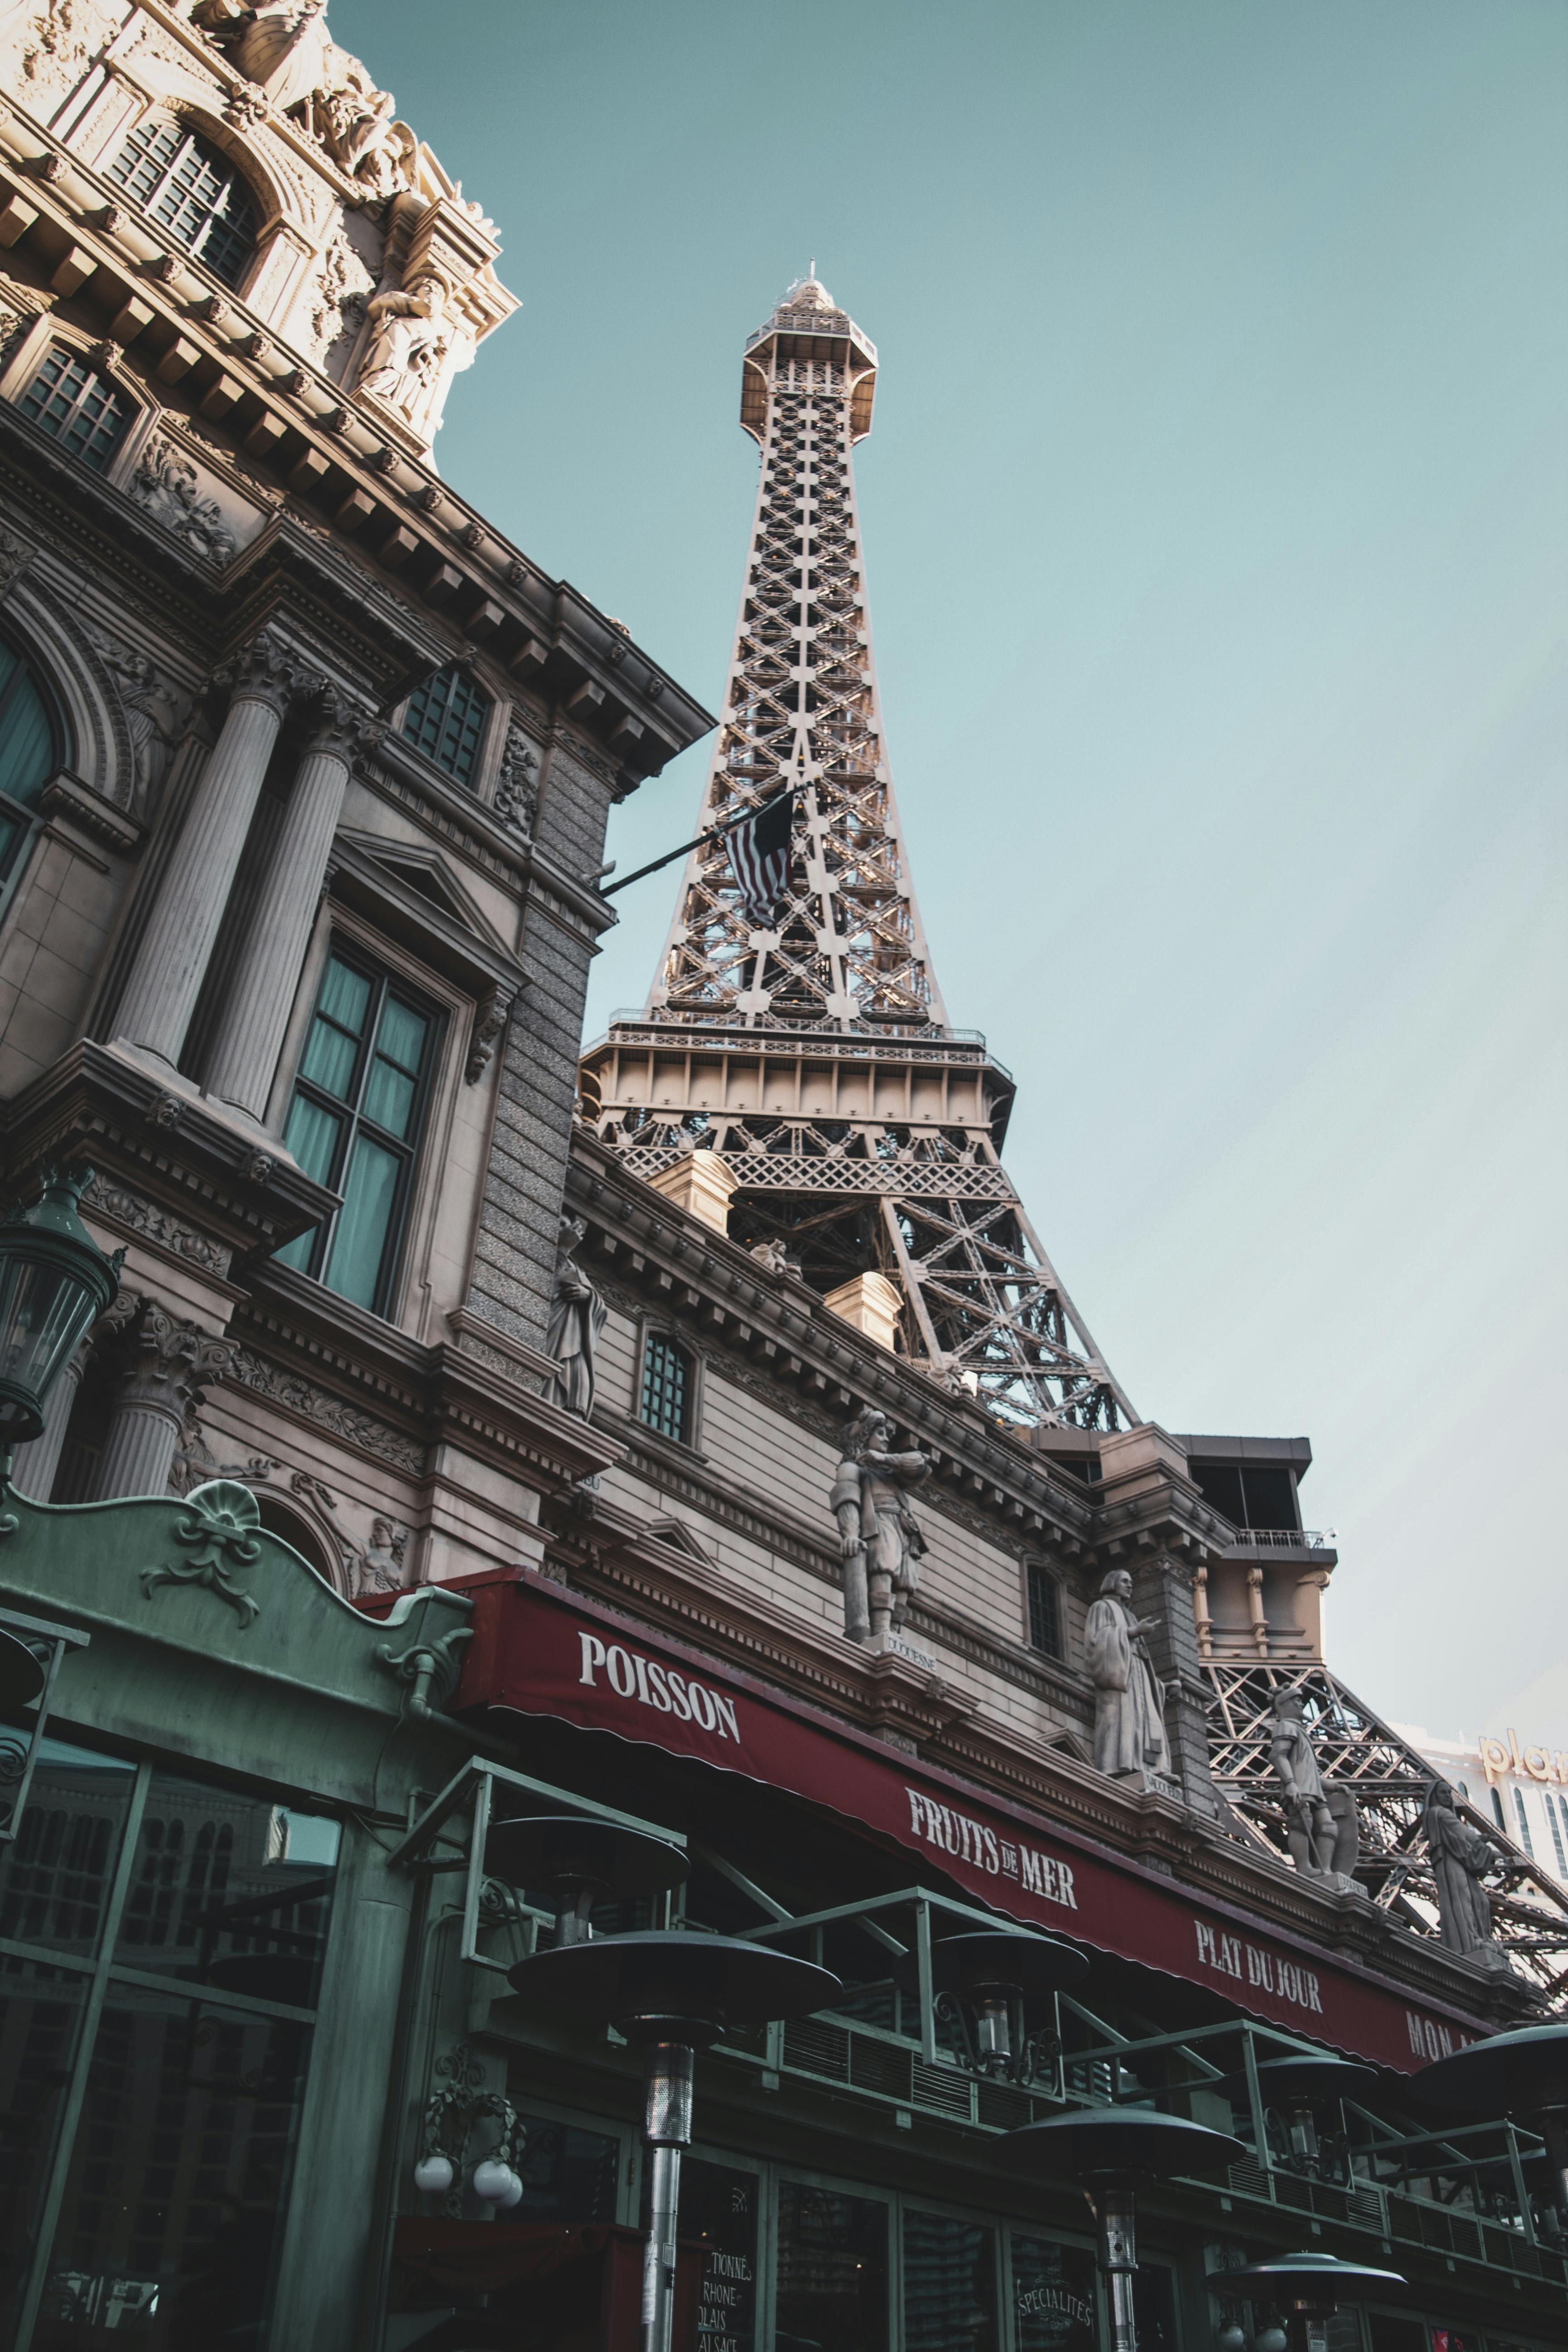 Street View Of Eiffel Tower By Paris Hotel Las Vegas Stock Photo - Download  Image Now - iStock